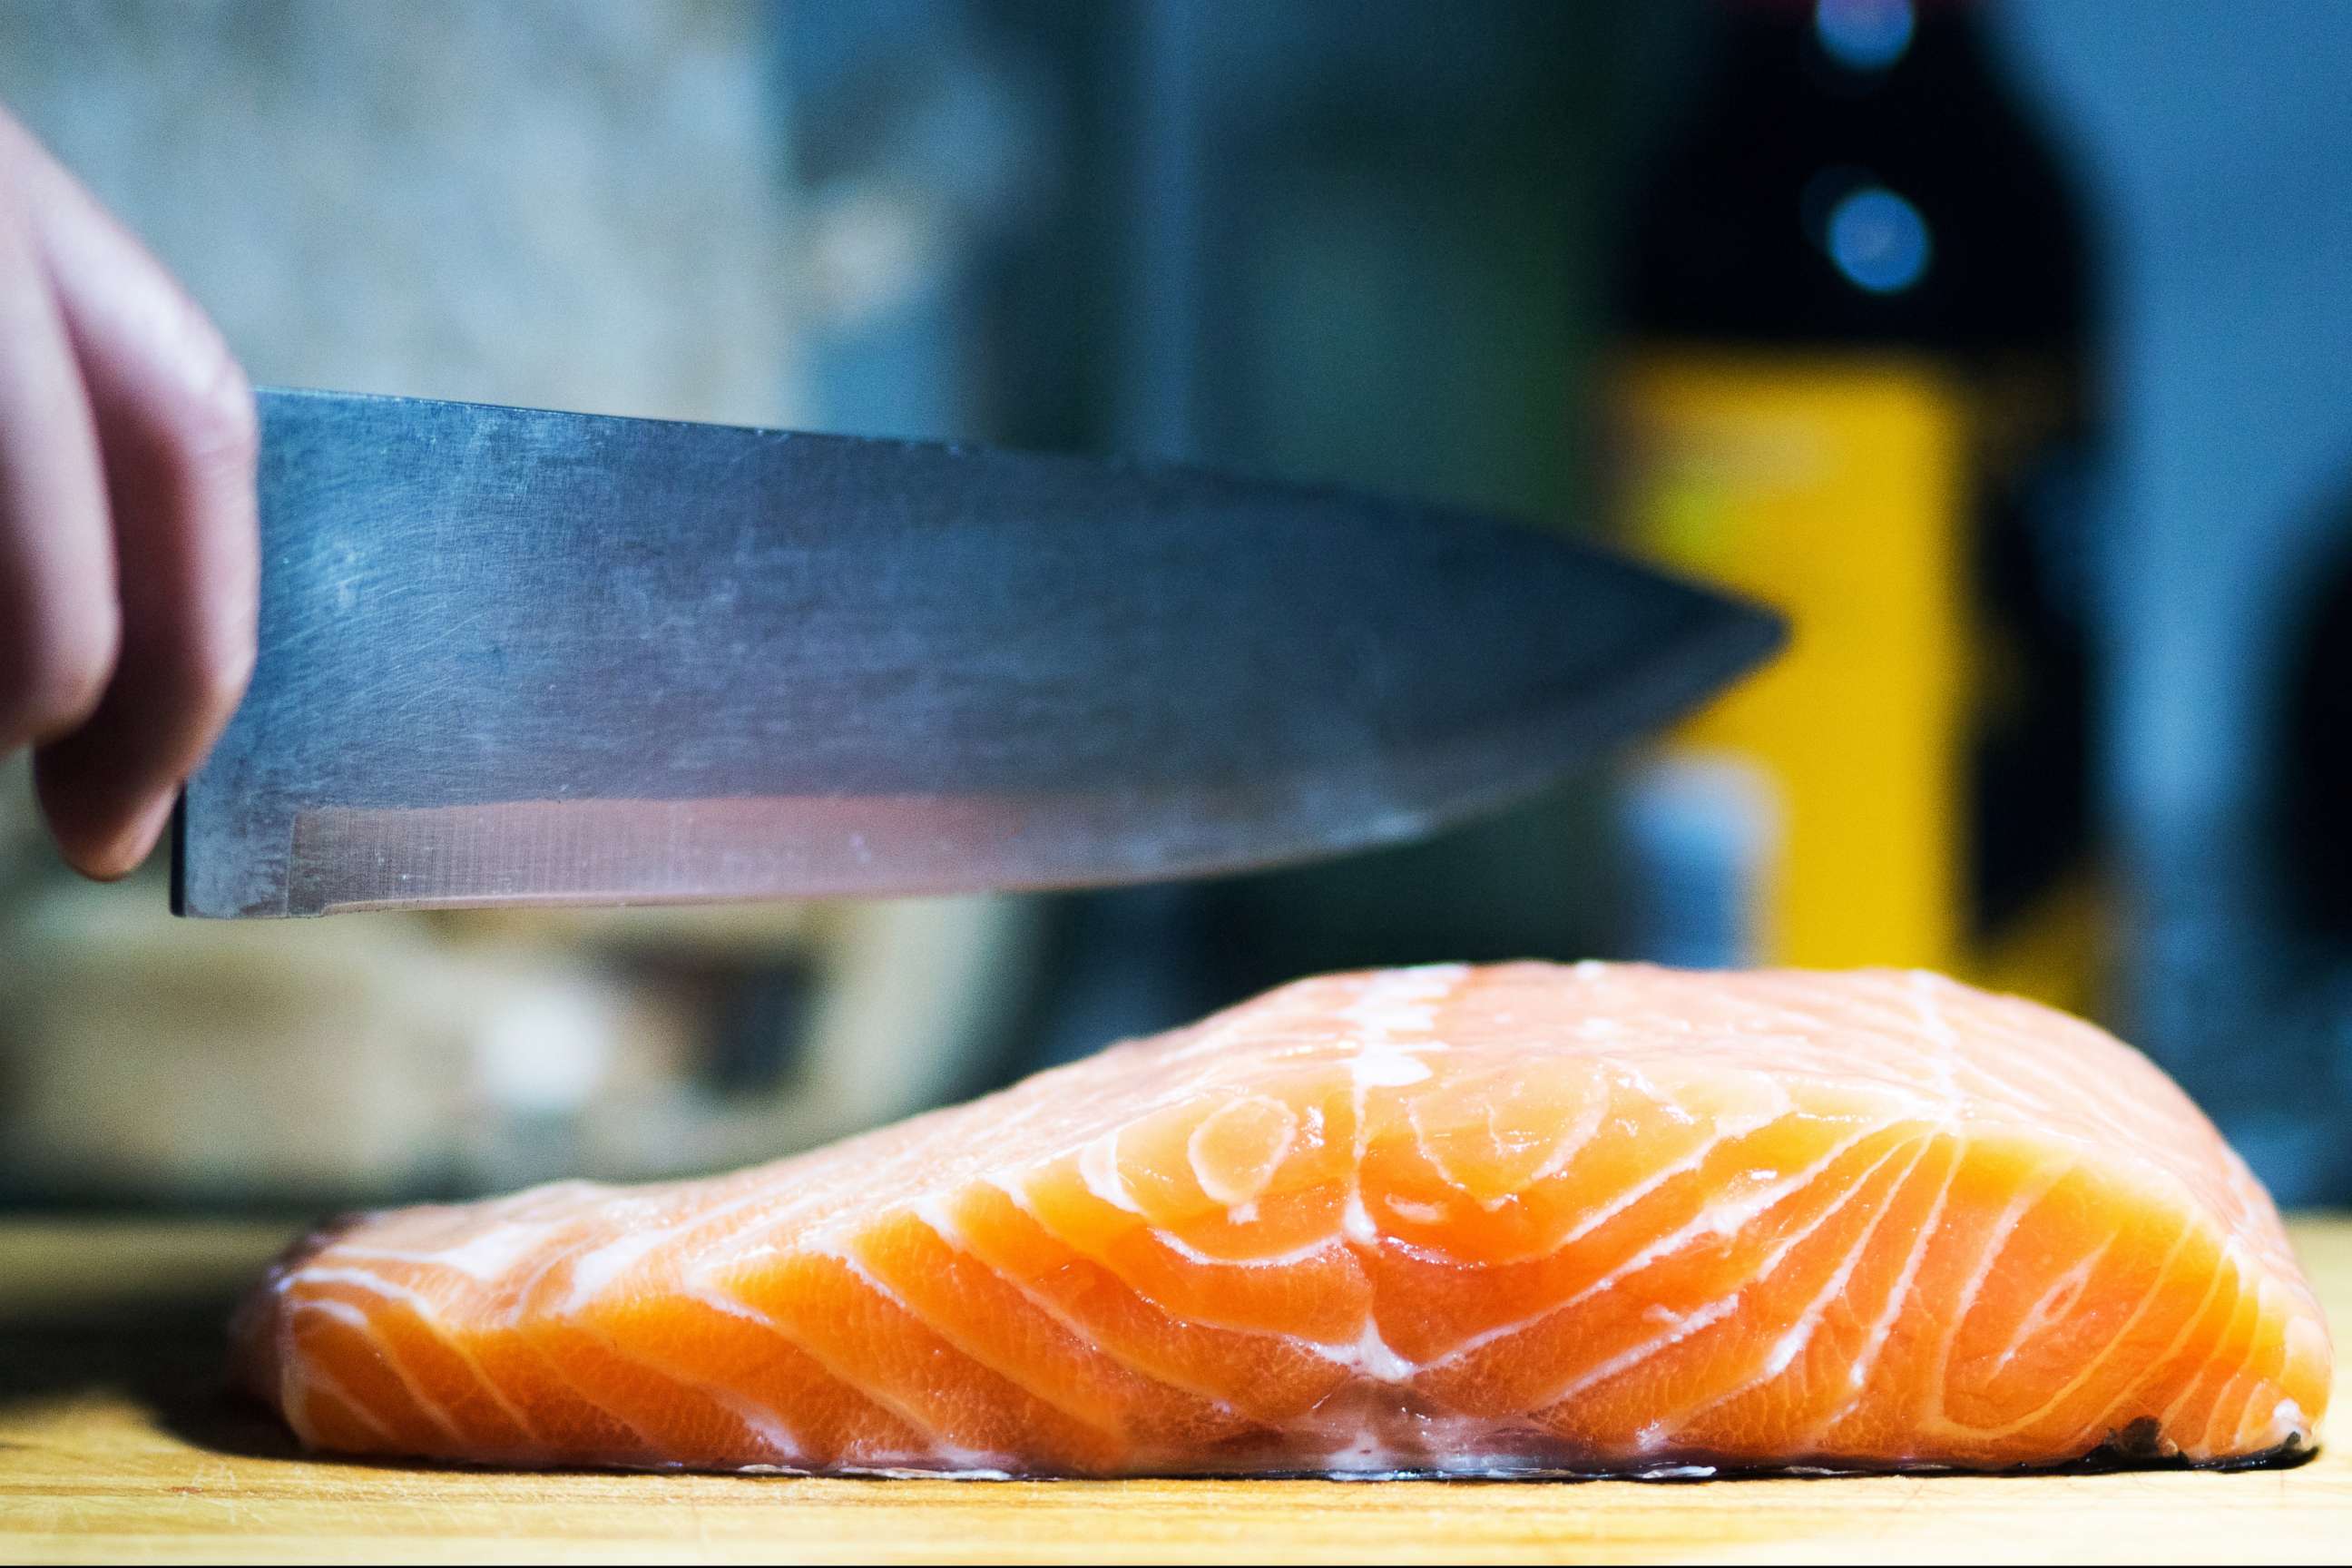 PHOTO: This stock photo depicts a chef preparing salmon.